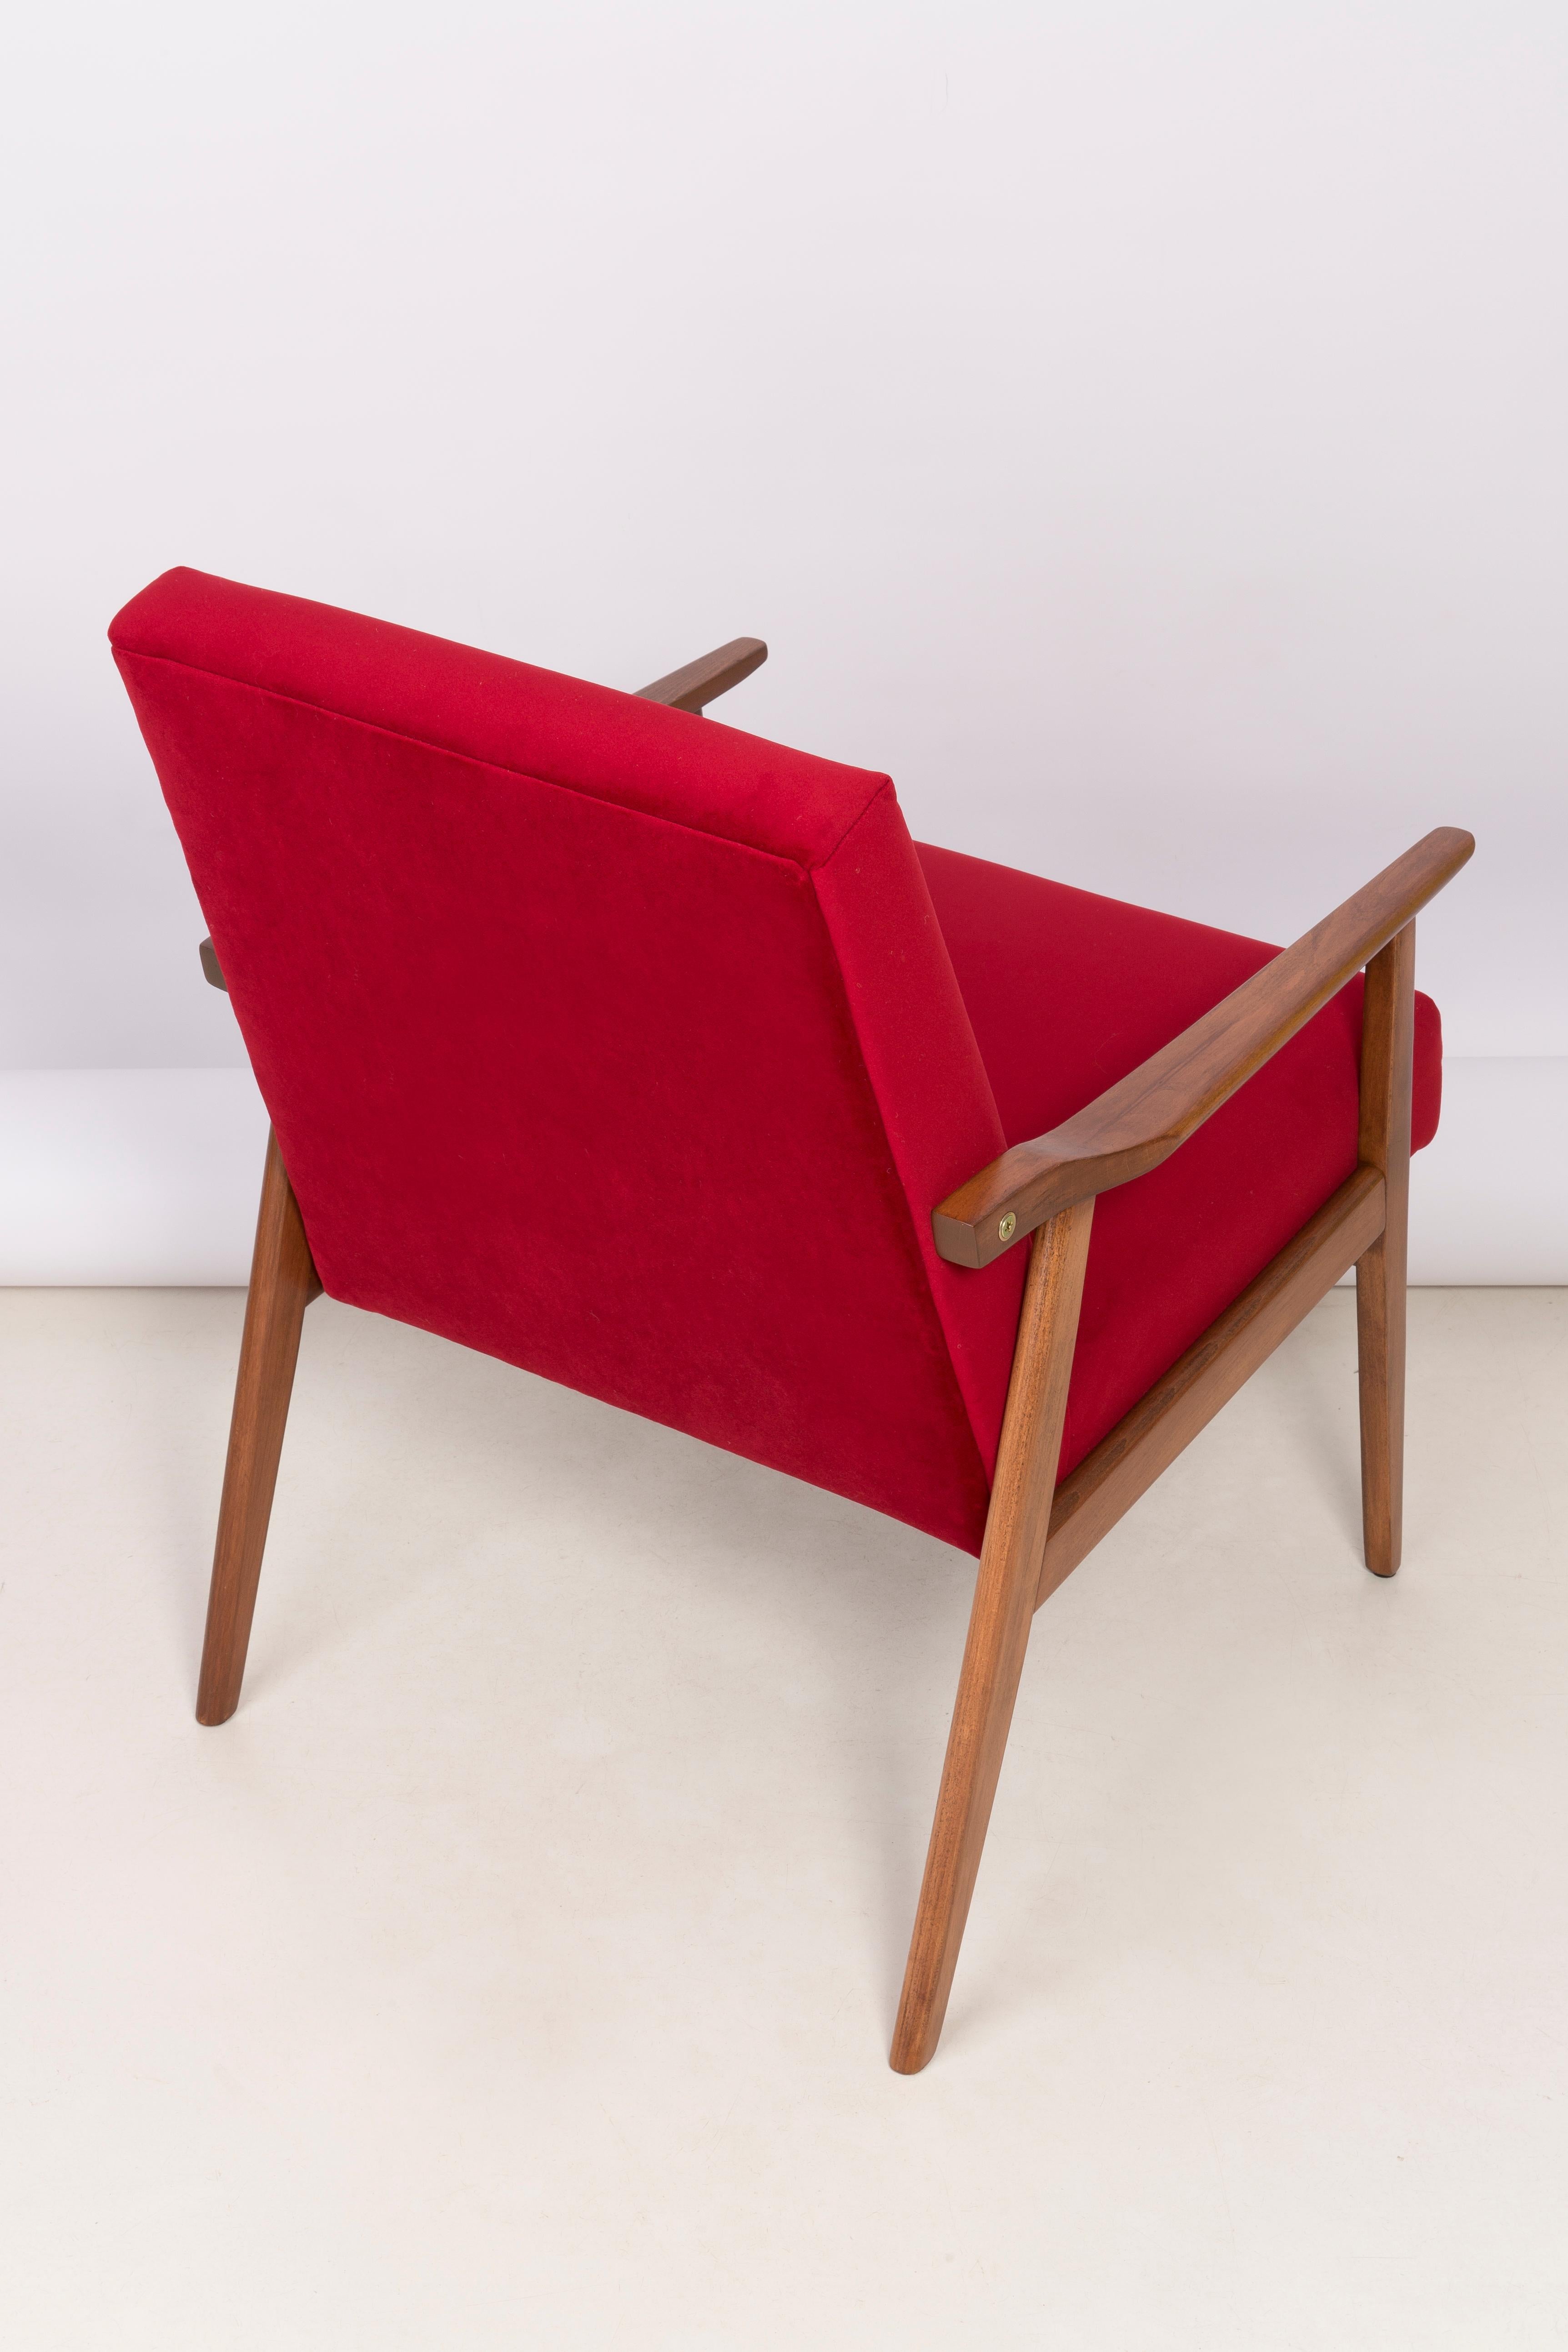 Set of Four Midcentury Red Velvet Dante Armchairs, Europe, 1960s For Sale 1